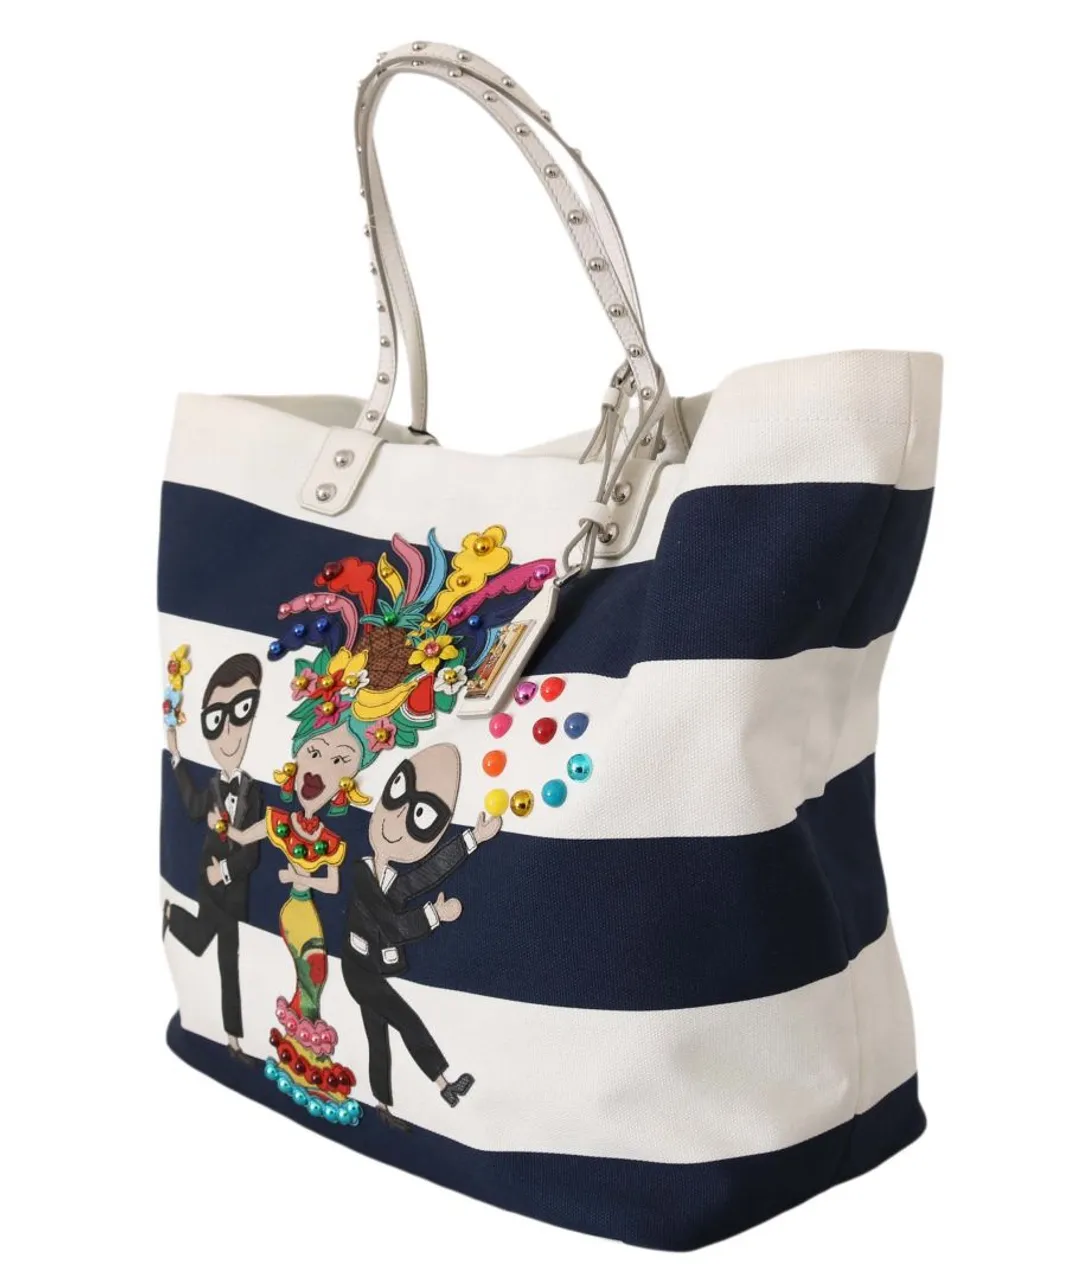 Dolce & Gabbana Womens Blue White Canvas BEATRICE #dgfamily Shopping Tote Purse - Multicolour Leather - One Size